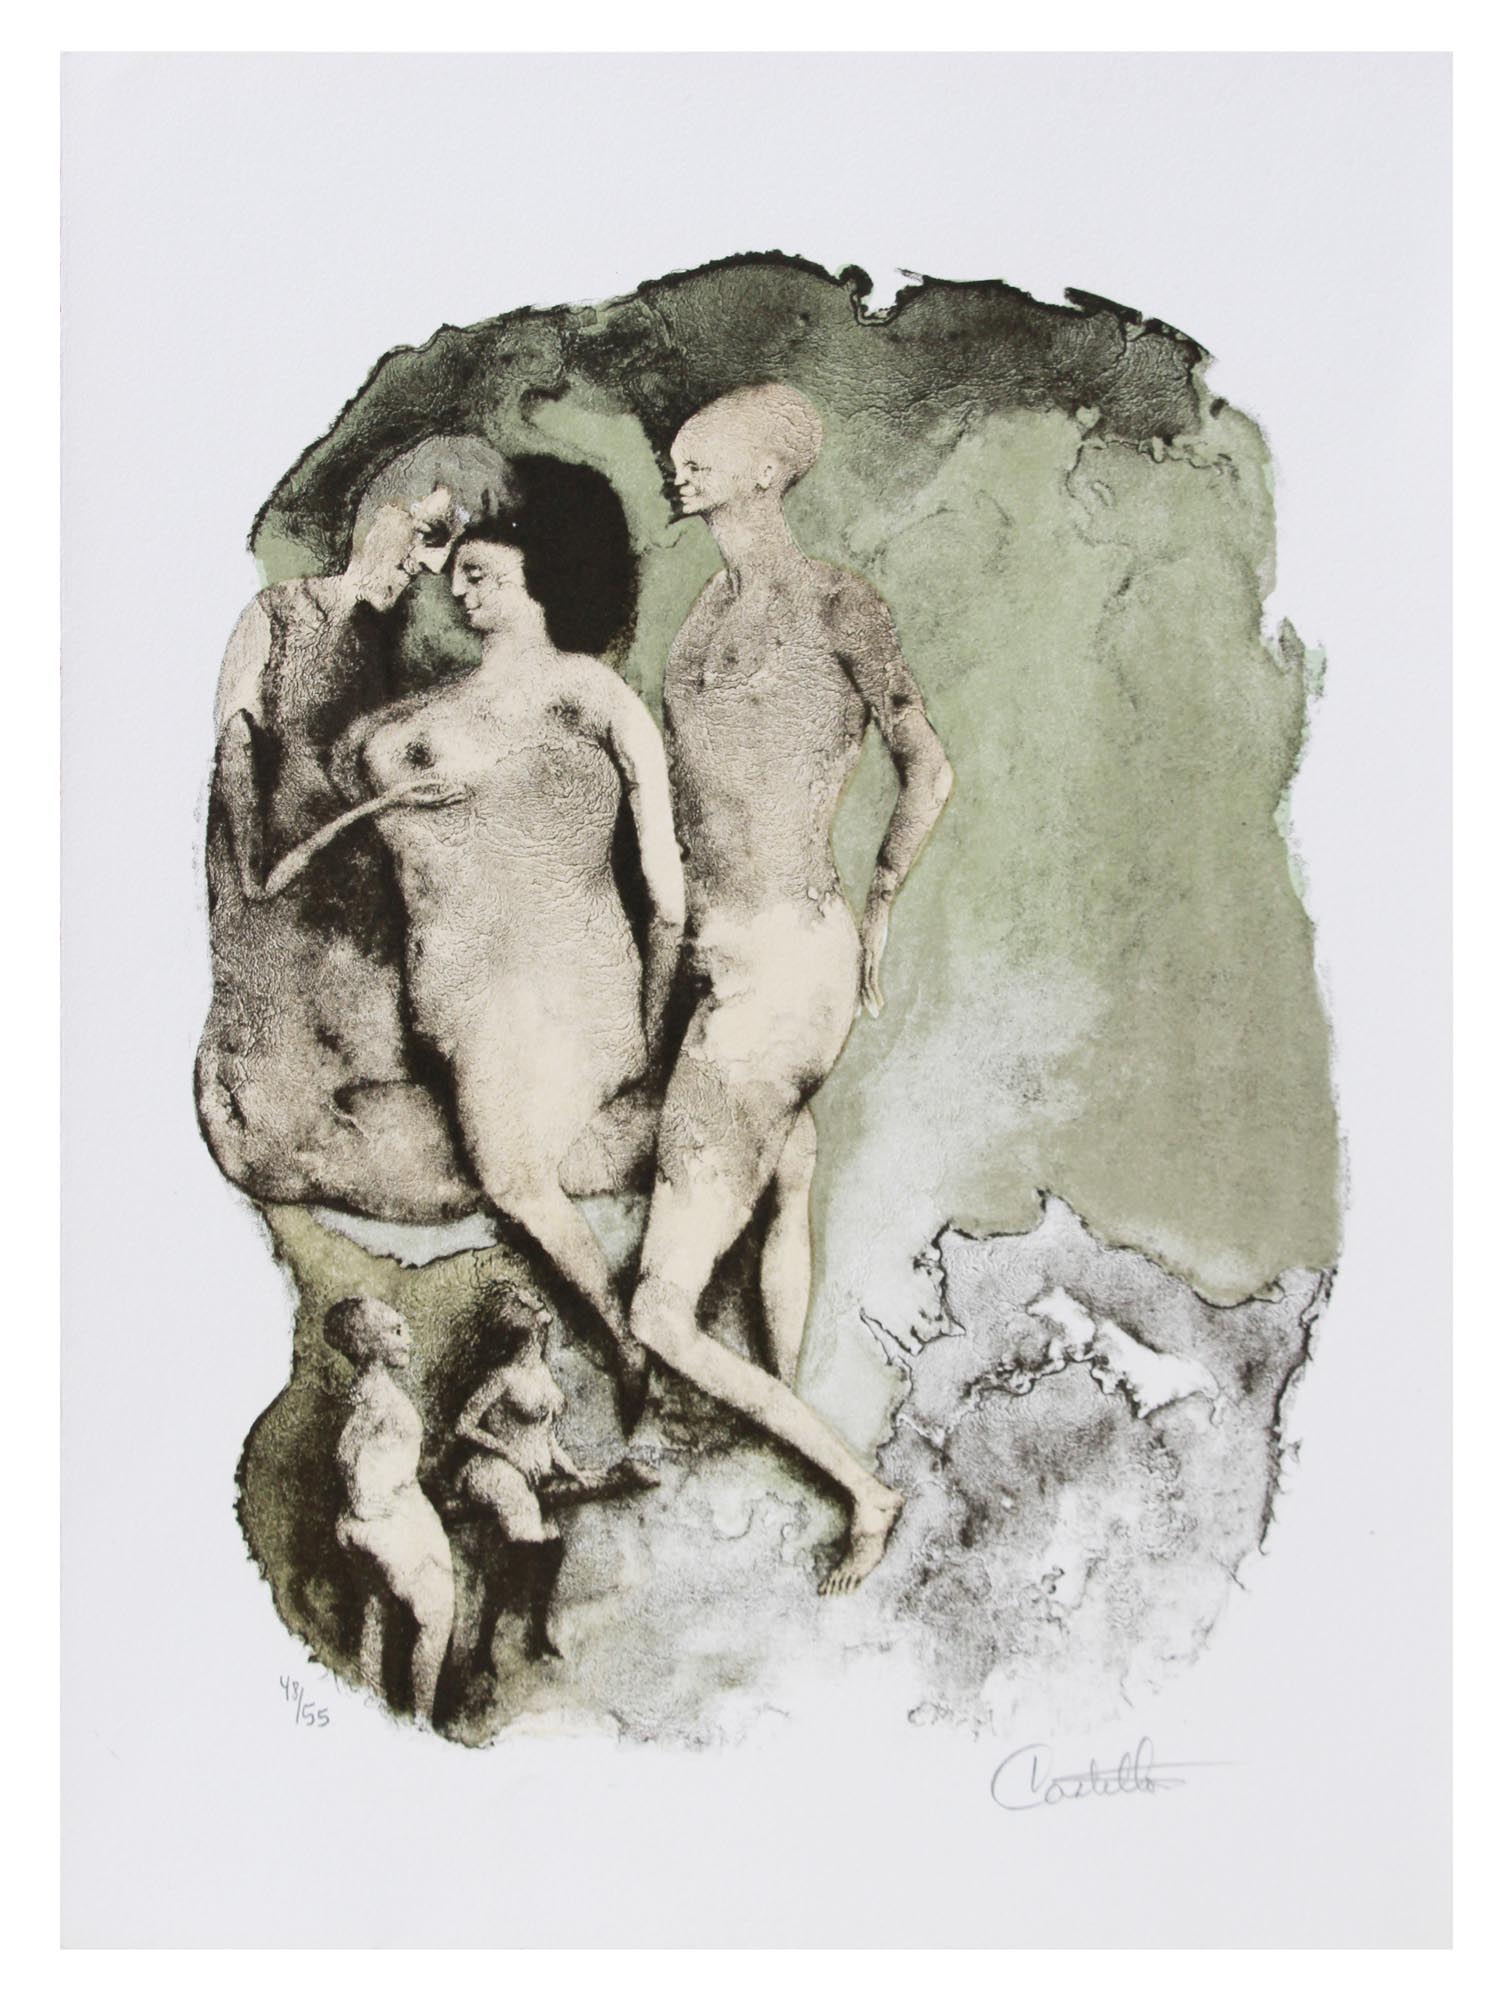 FOUR EROTIC LITHOGRAPHS BY FEDERICO CASTELLON PIC-1